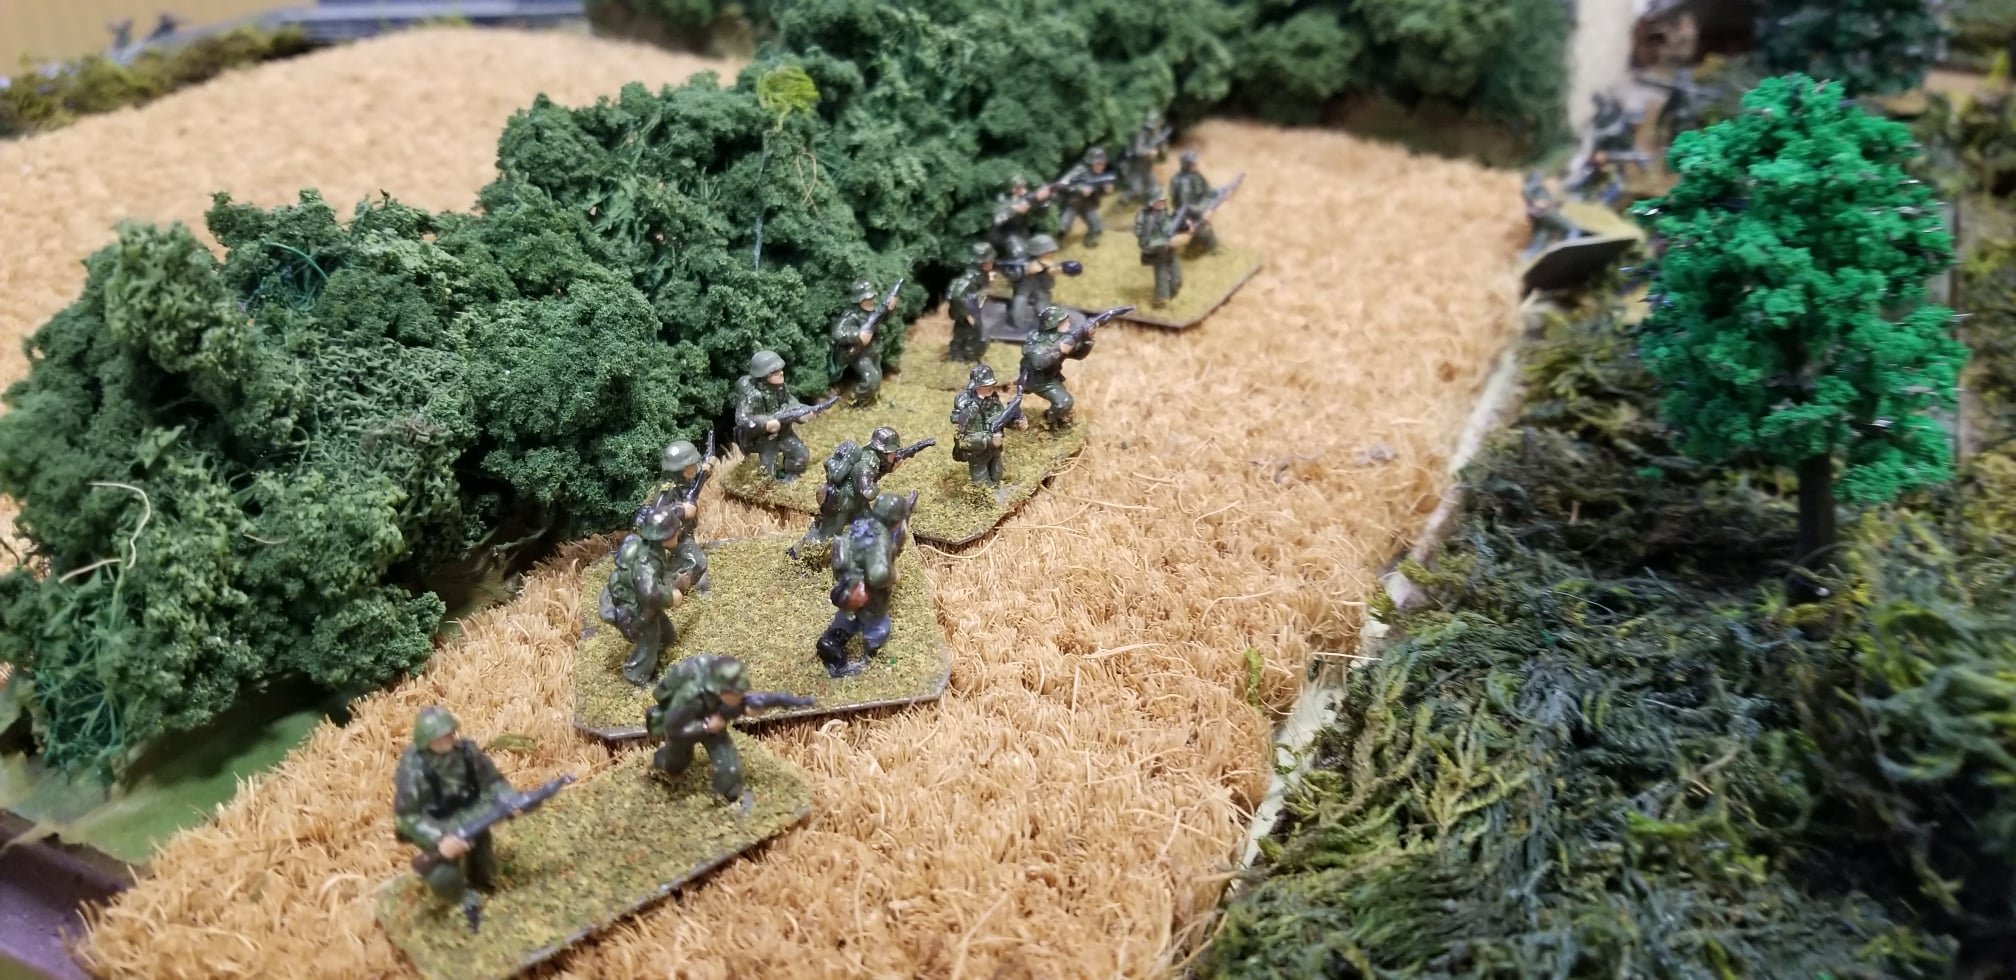 Panzergrenadiers overwhelm the Canadian left flank.